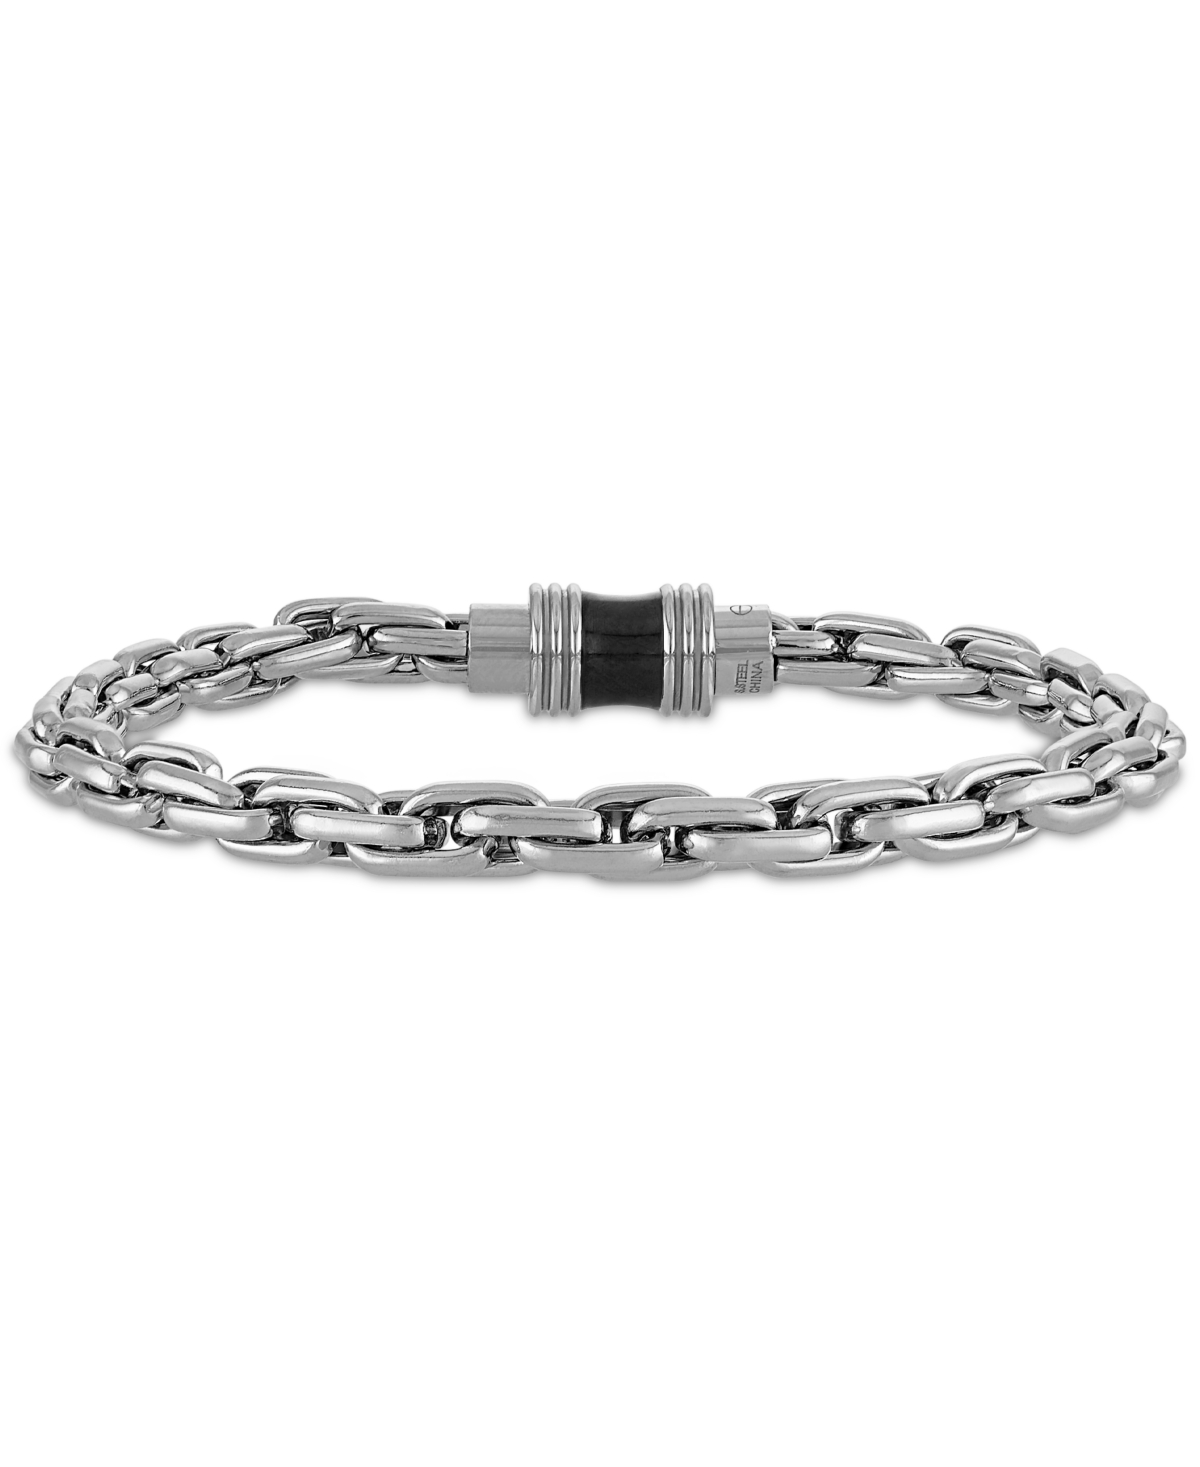 Elongated Oval Link Chain Bracelet in Stainless Steel, Created for Macy's - Steel